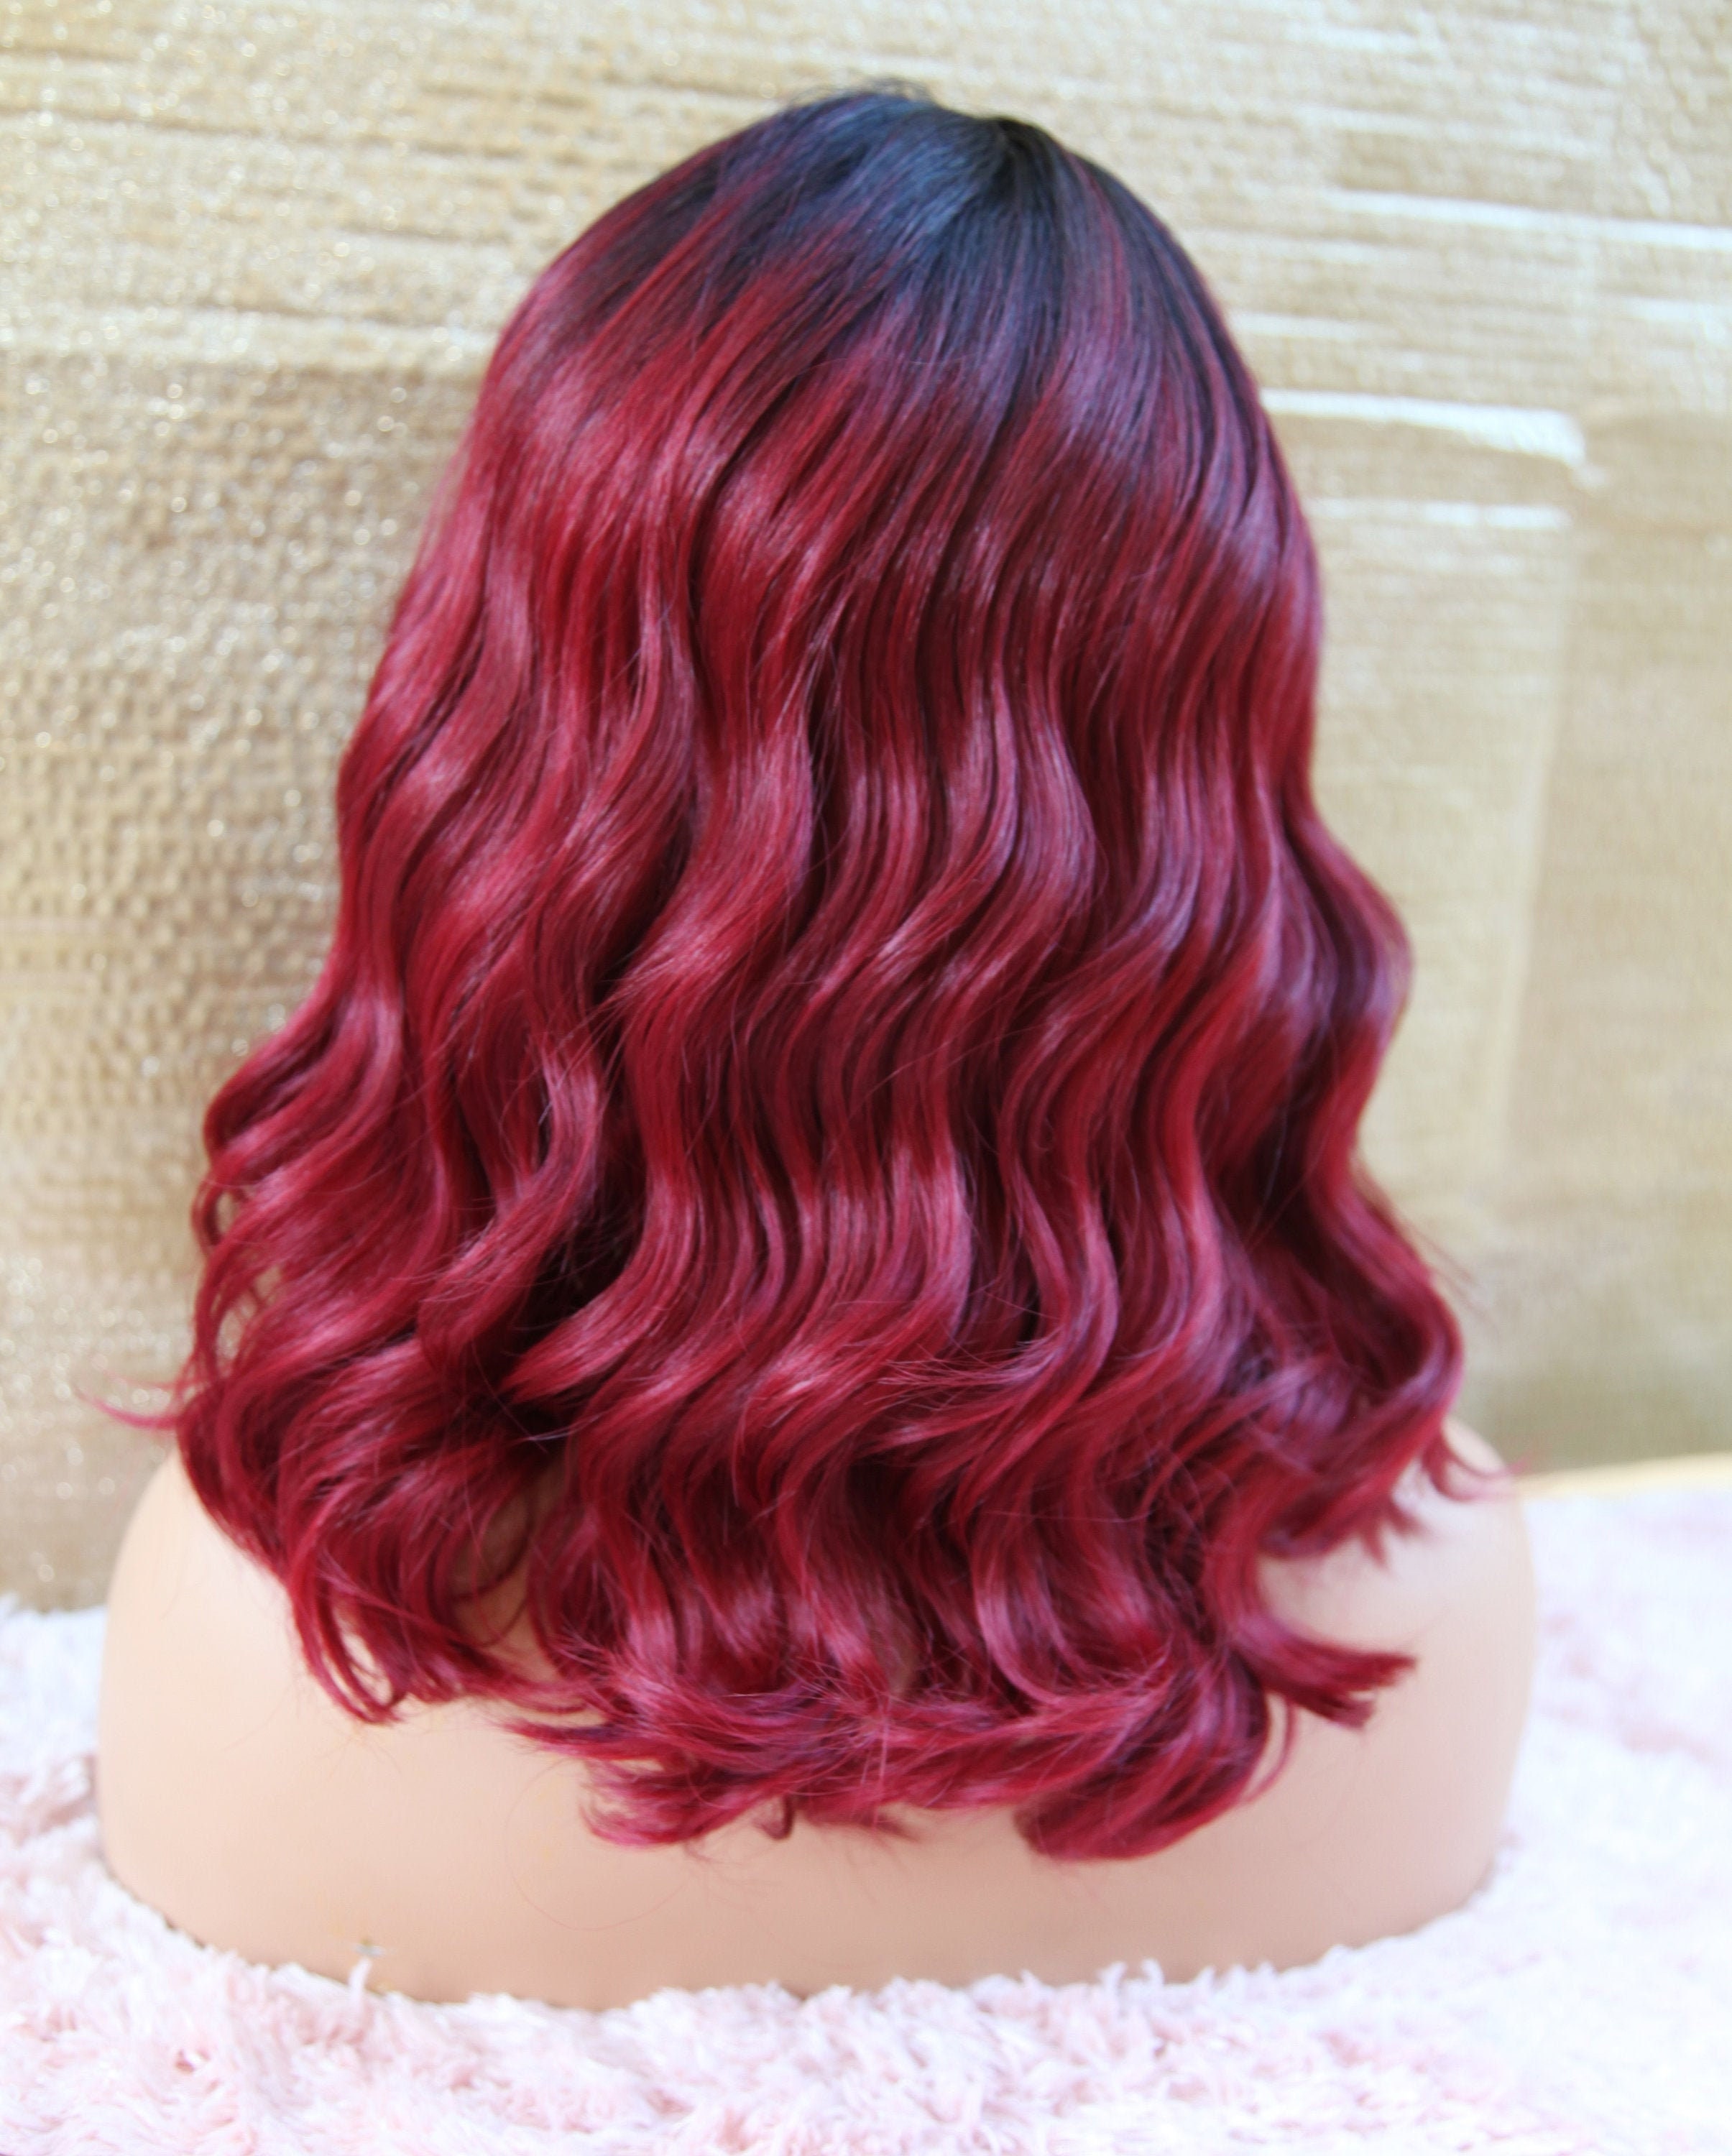 Burgundy Lace Front Wig, Blended Human Hair, Extra Large For Natural Parting Of Your Choice